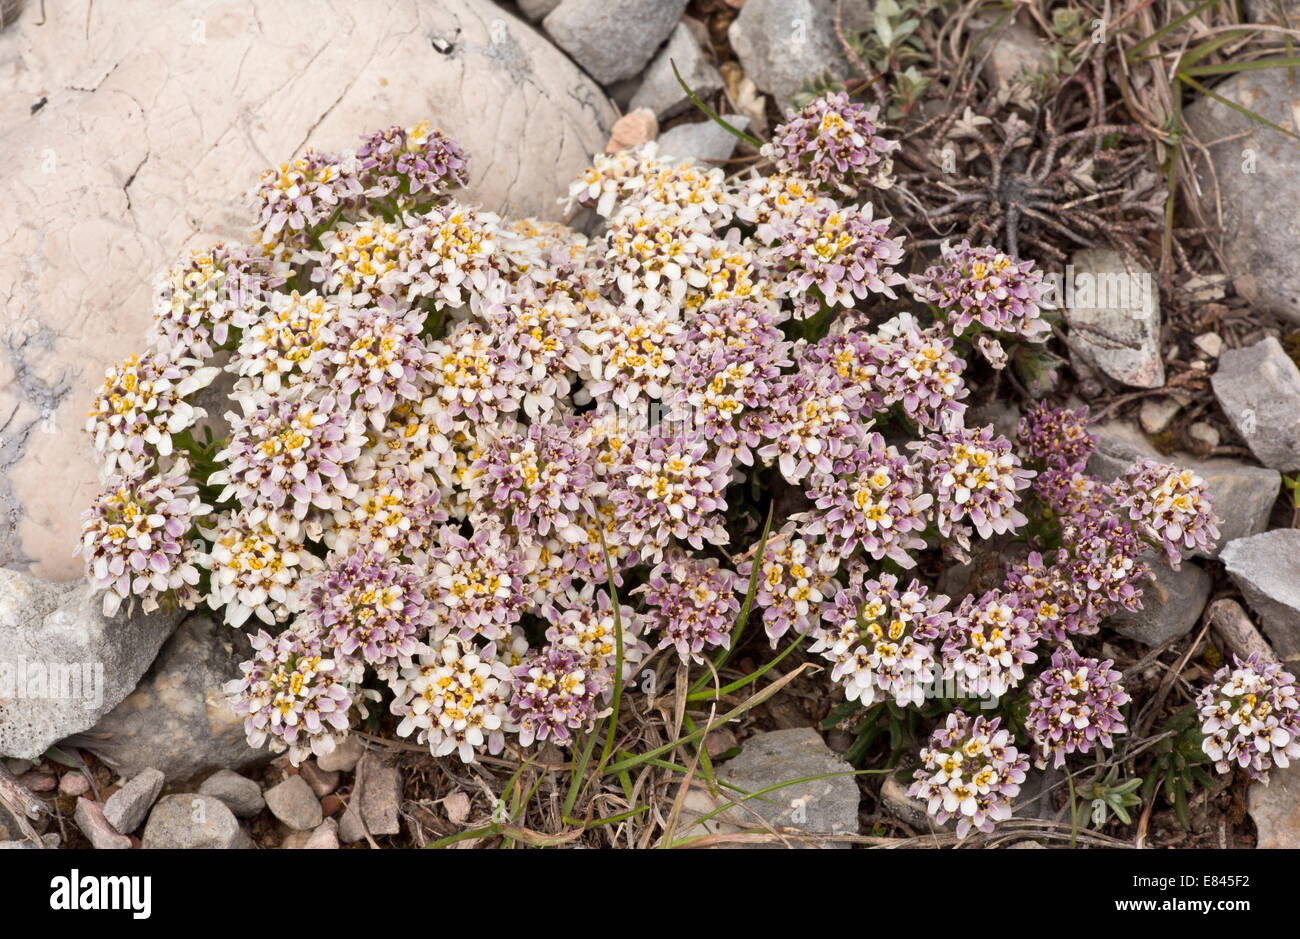 Apennean Pennycress, Thlaspi stylosum in Gran Sasso National Park Apennines, Italy. Stock Photo